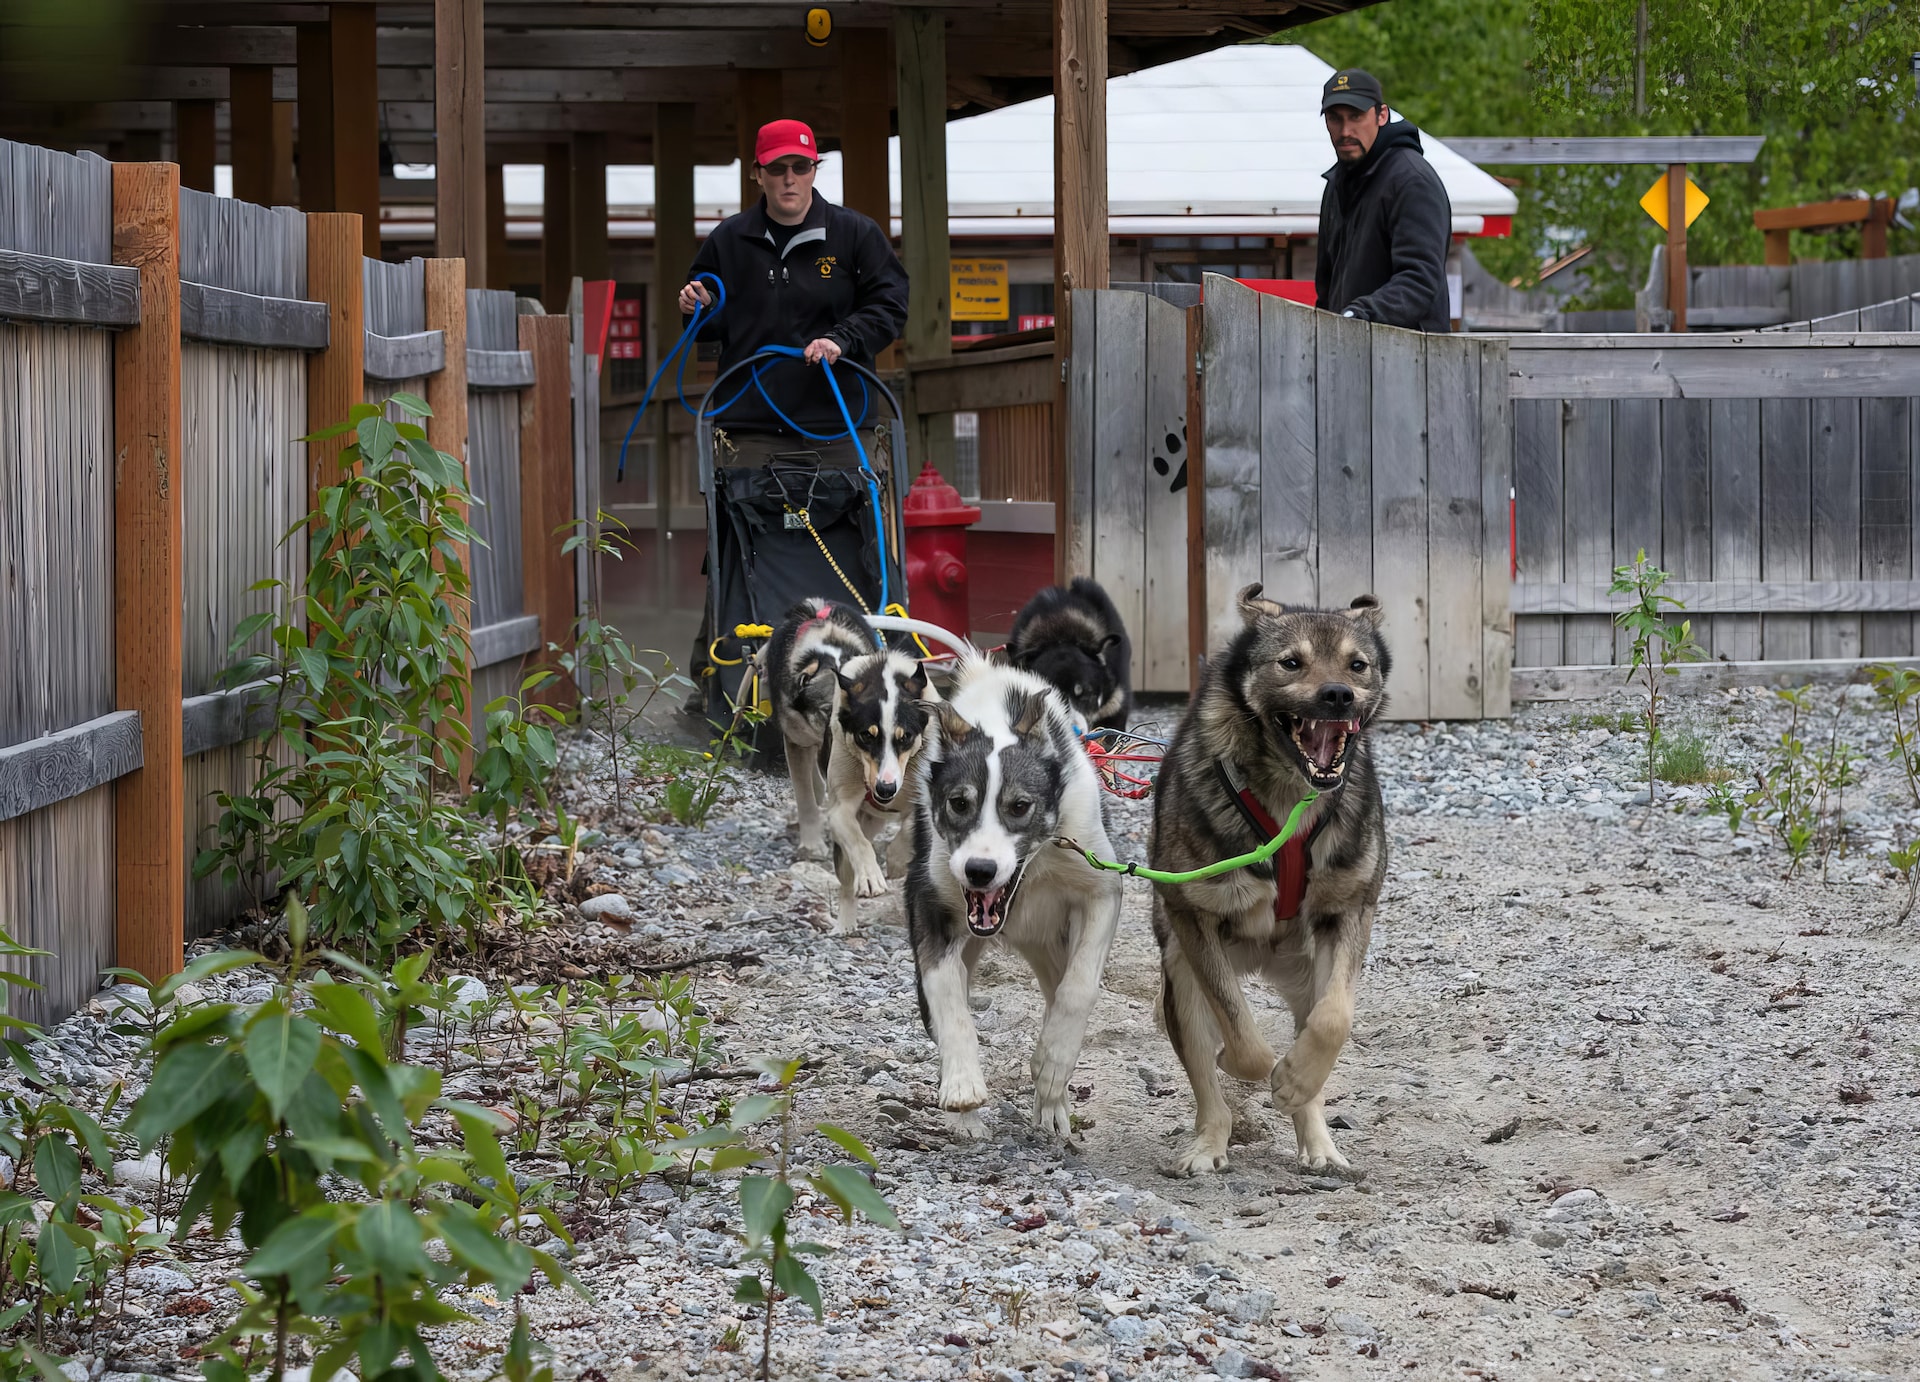 Gold Fever Alaskan Sled Dogs and Exclusive Scenic Railway